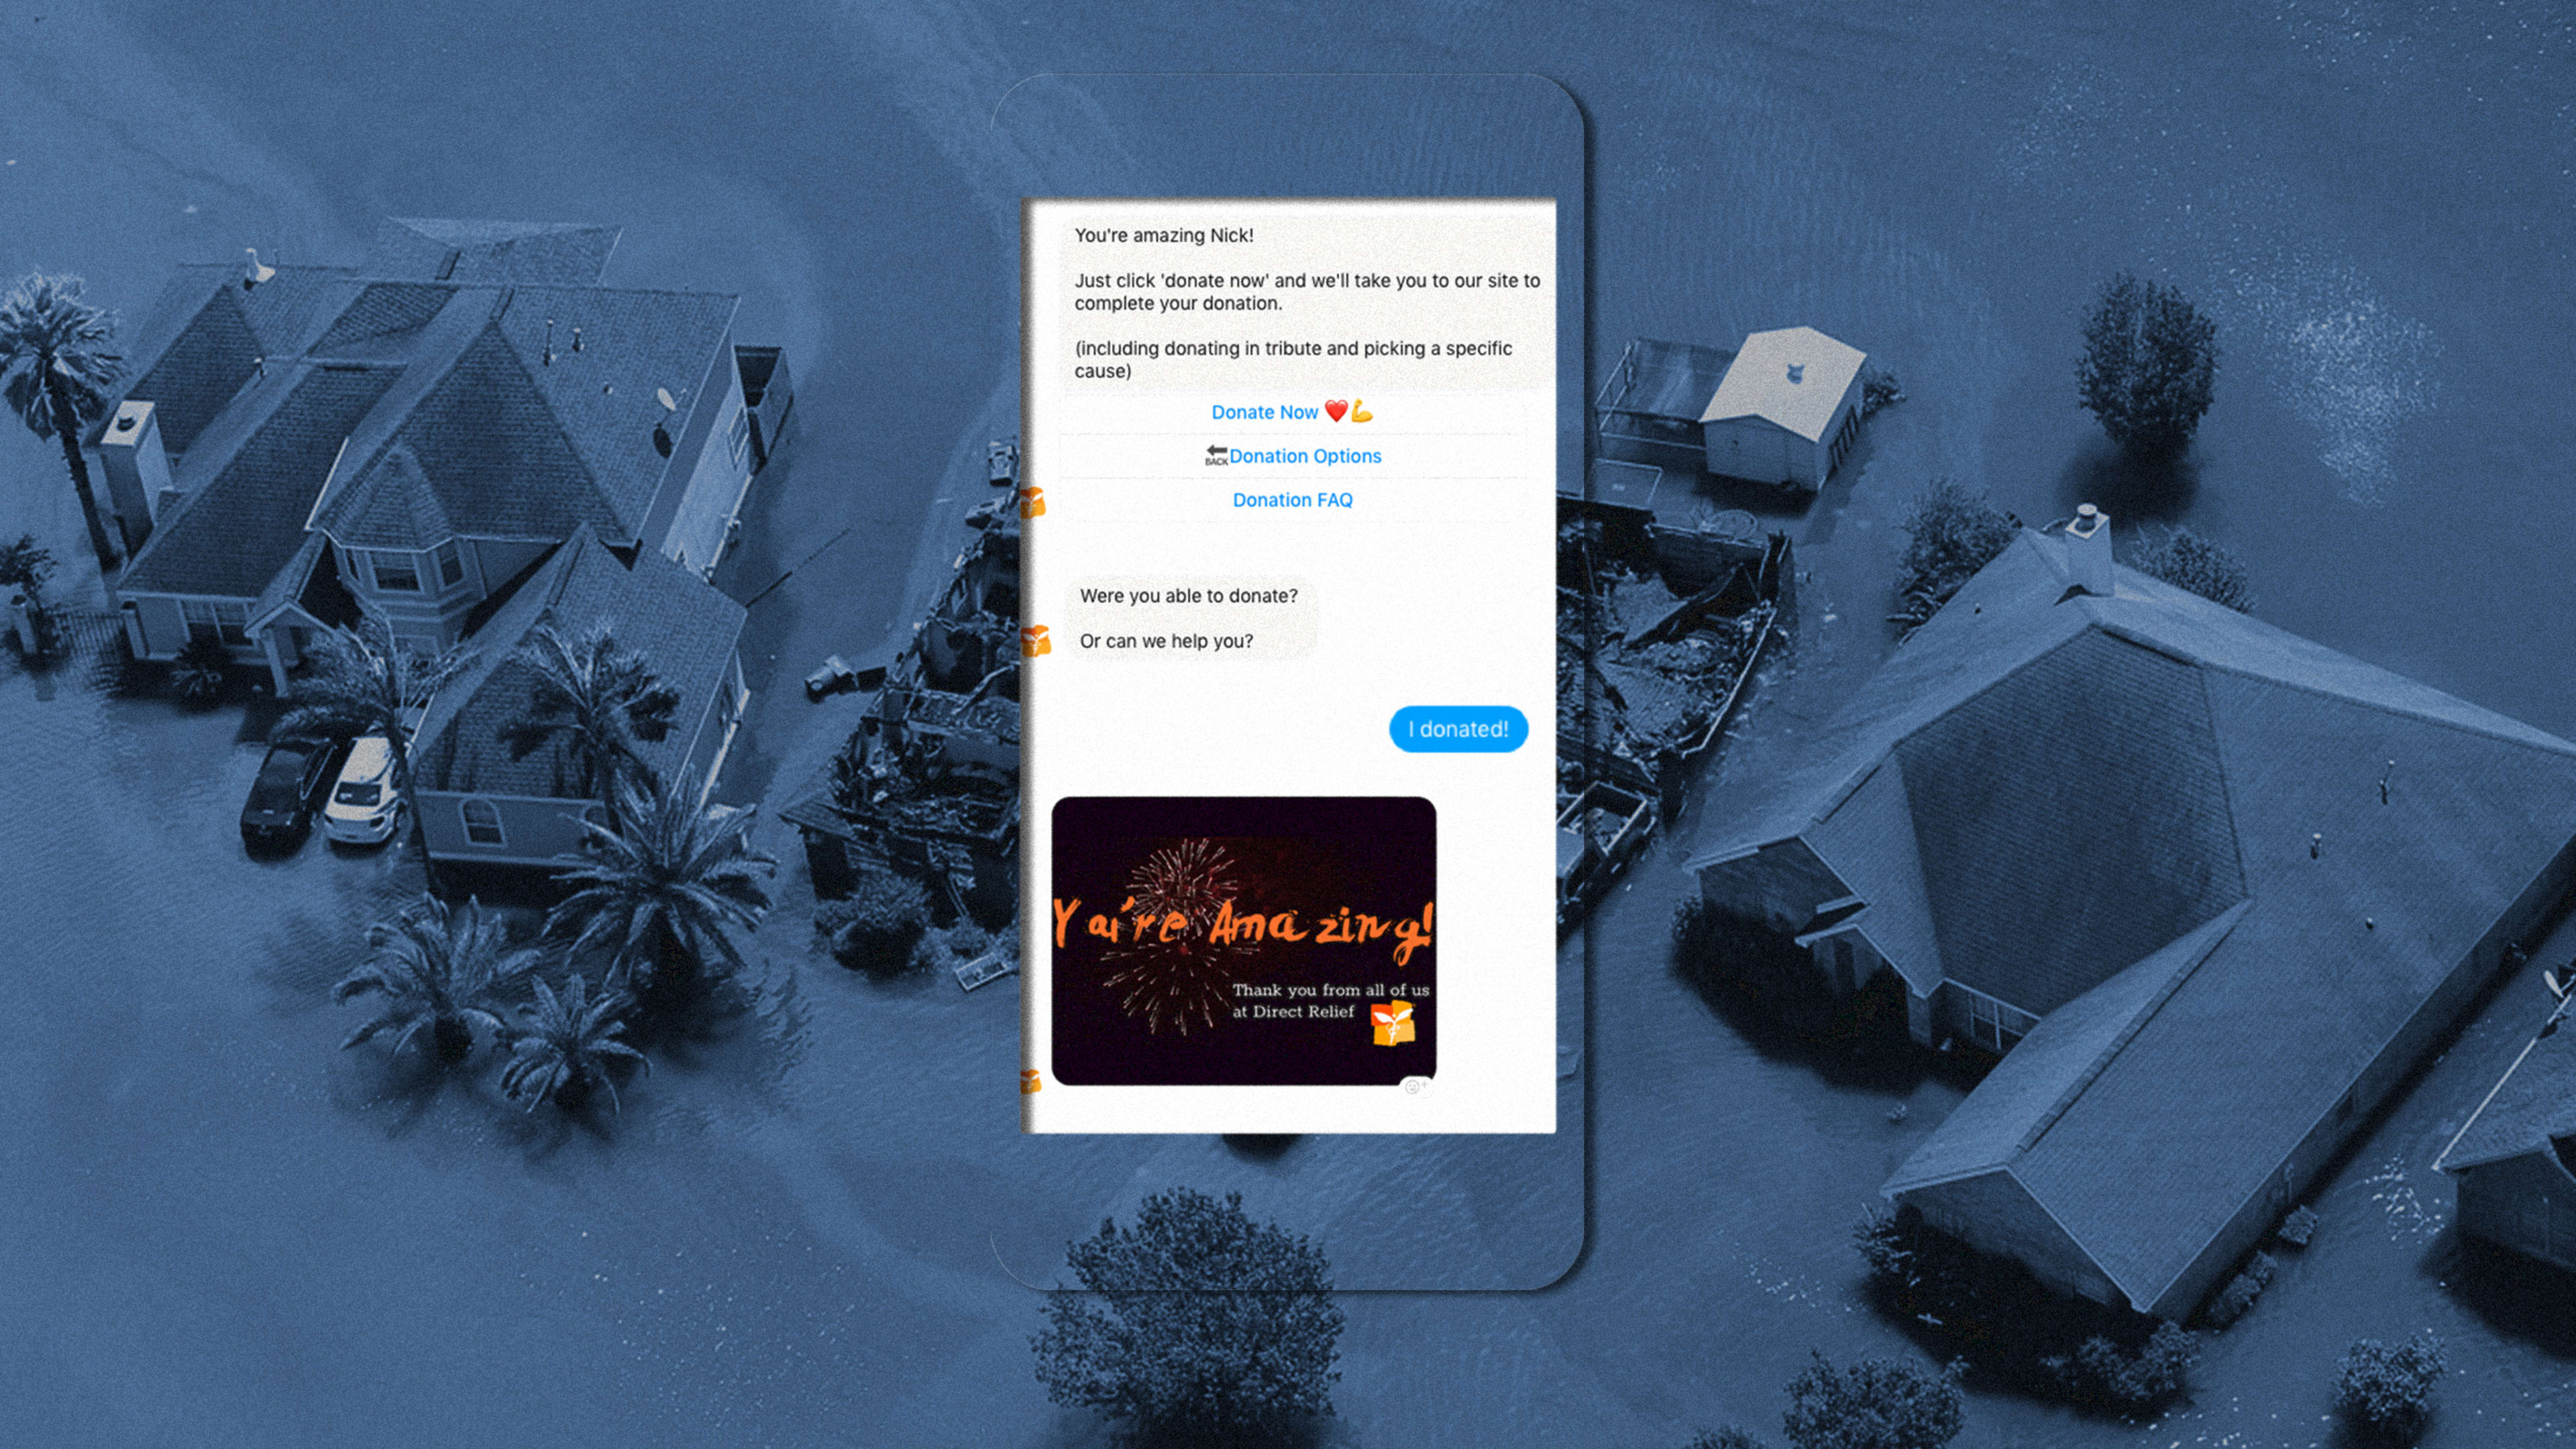 This chatbot is designed to help disaster-relief organizations quickly offer assistance